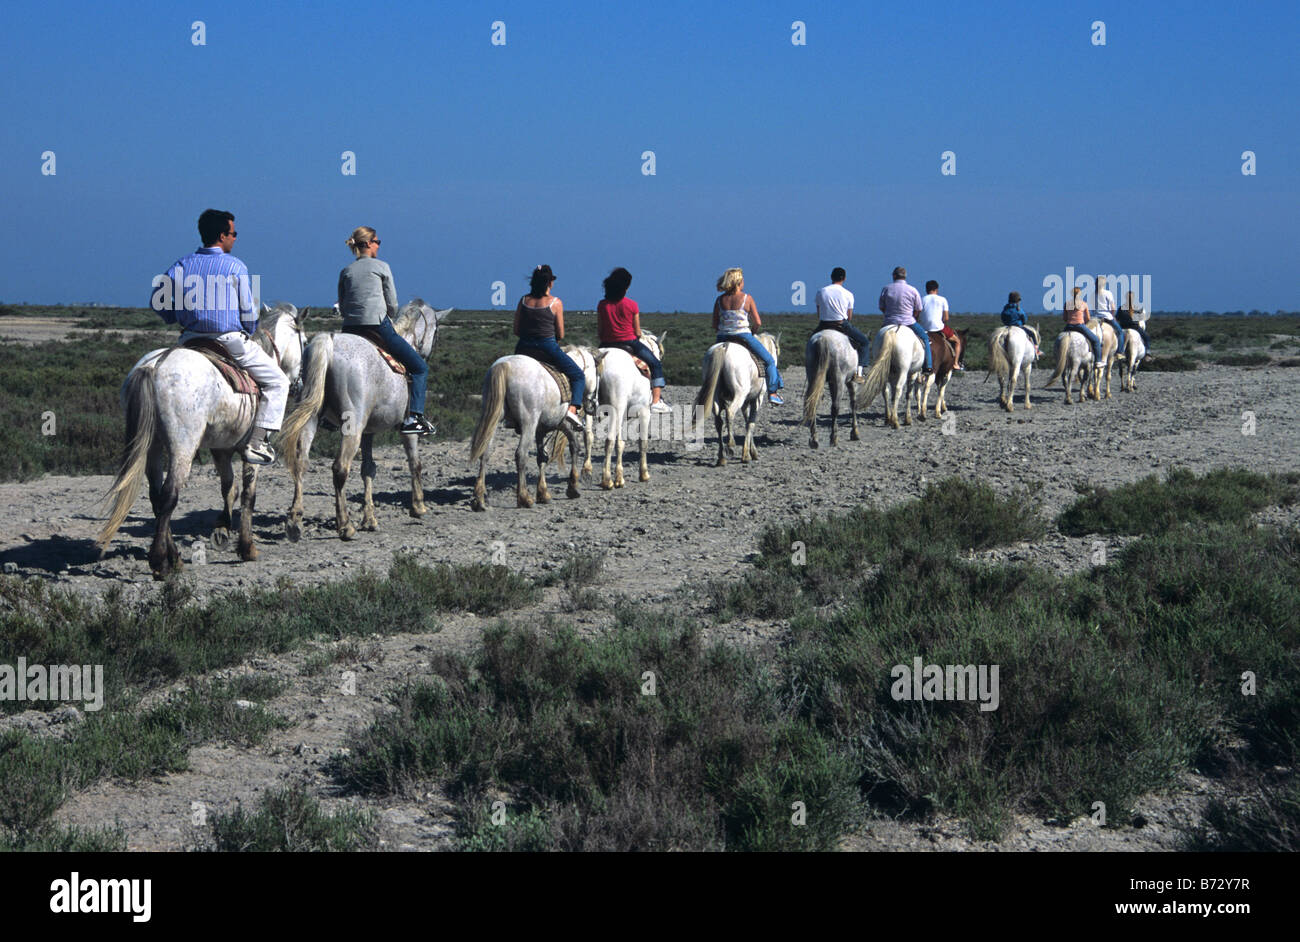 Horseriding on White Camargue Horses Along the Banks of the Etang (or Lake) of Vaccarès, Camargue, Provence, France Stock Photo